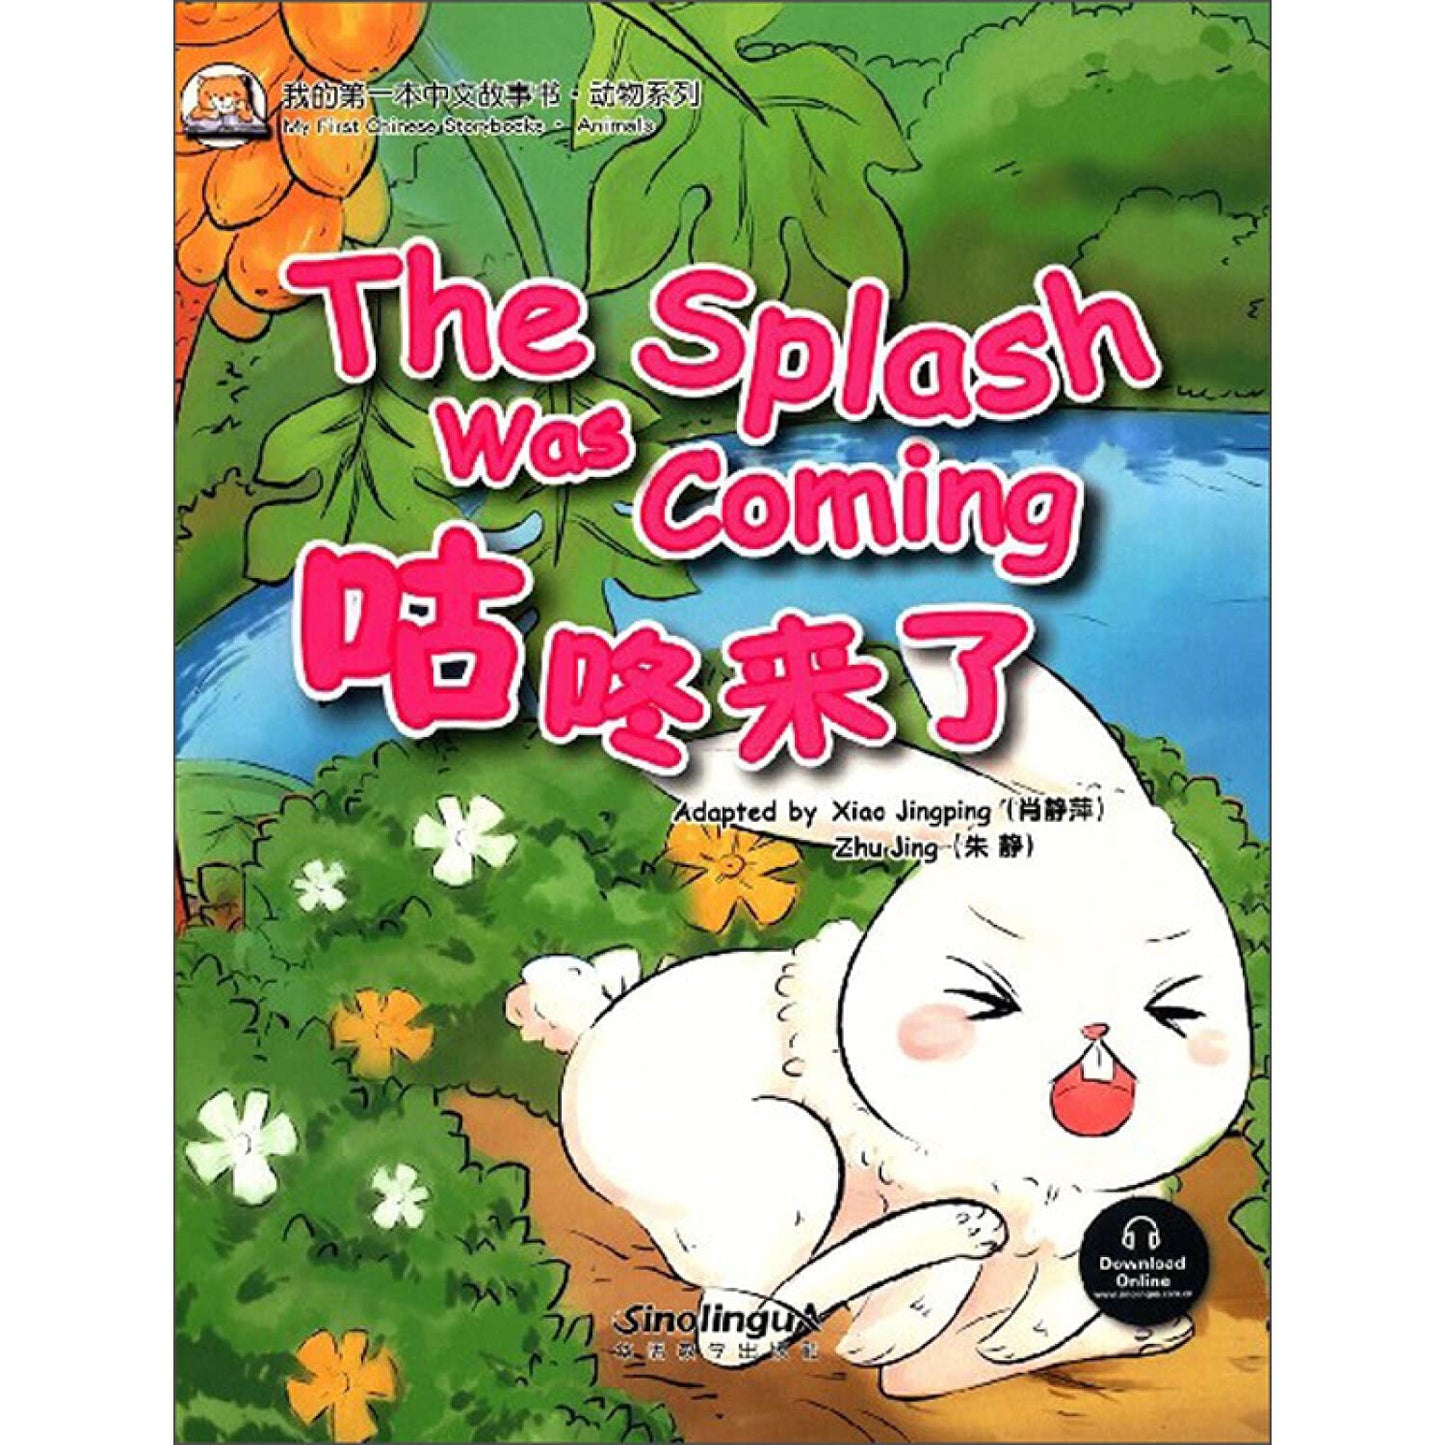 My First Chinese Storybooks: The Splash was Coming (English and Chinese Edition)